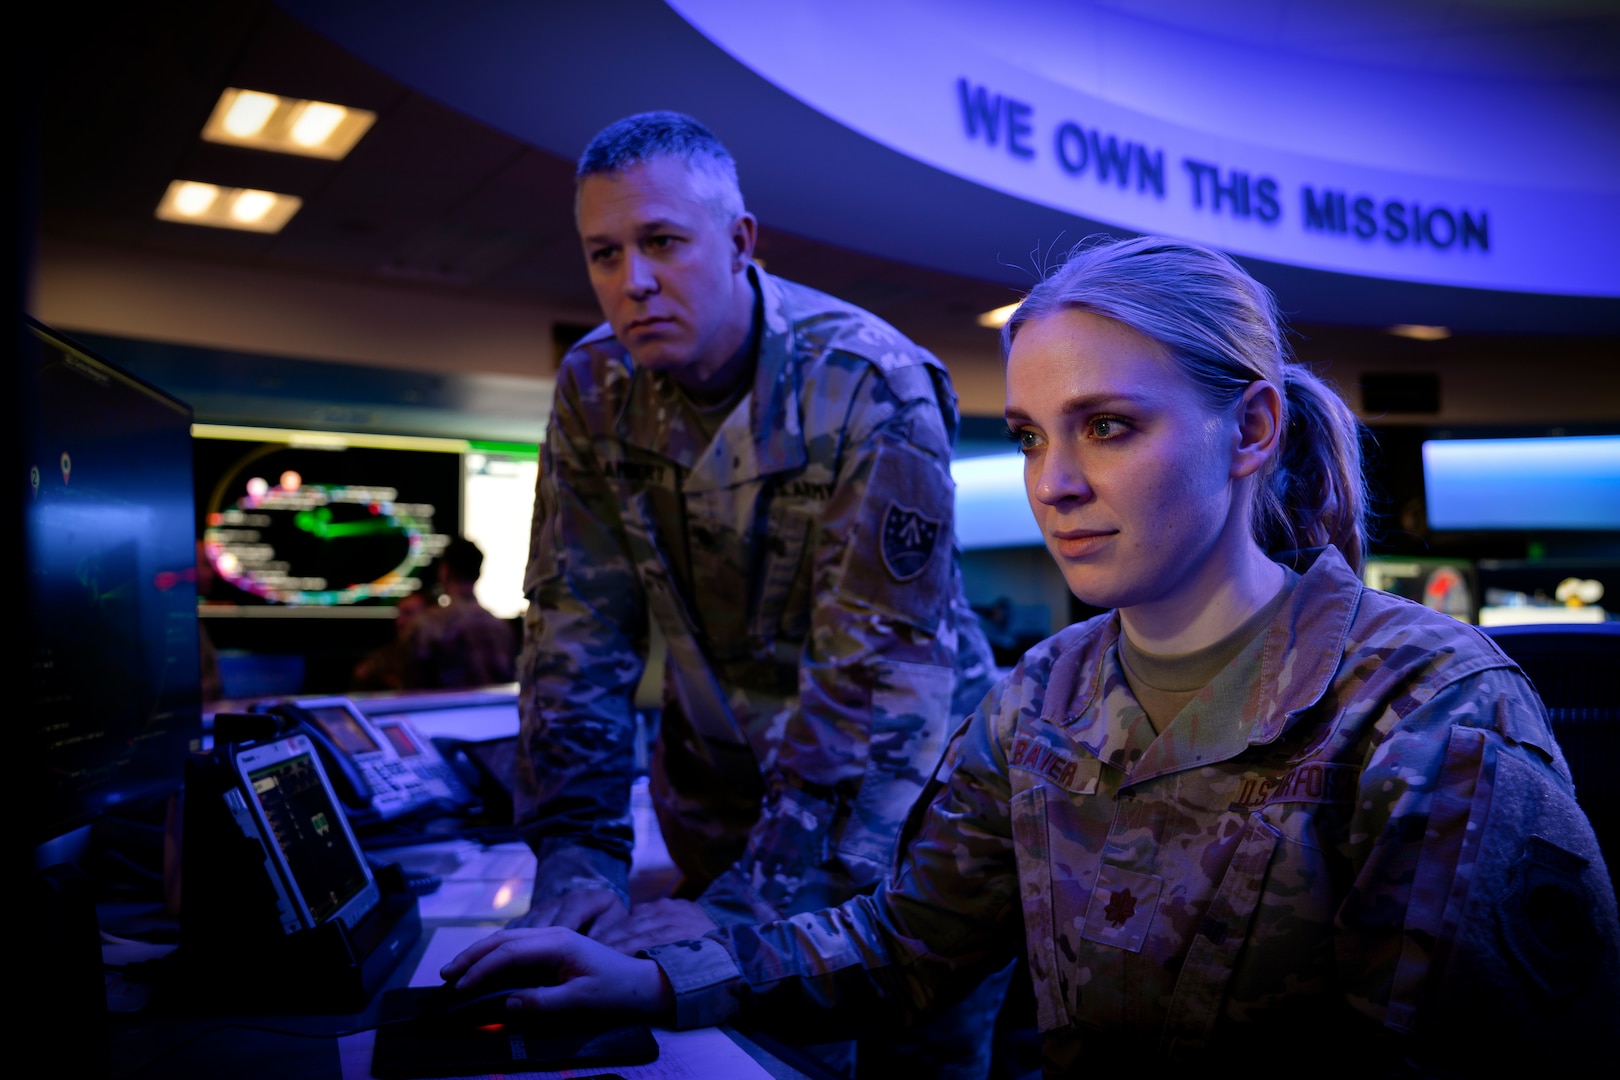 Service members in uniform are photographed on a watch floor.